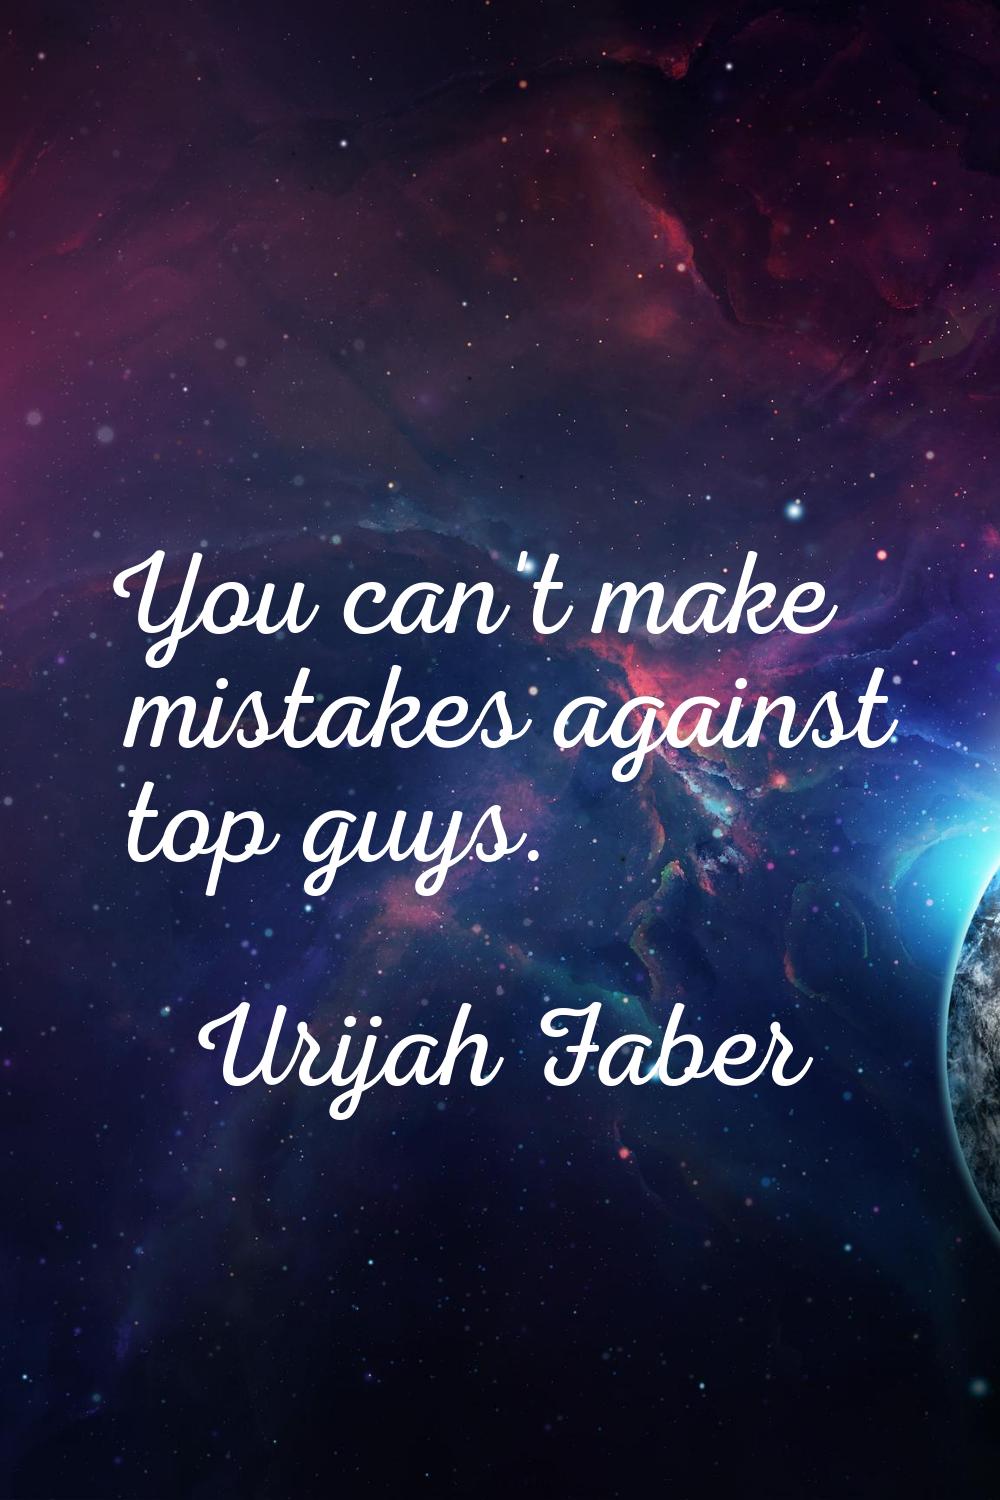 You can't make mistakes against top guys.